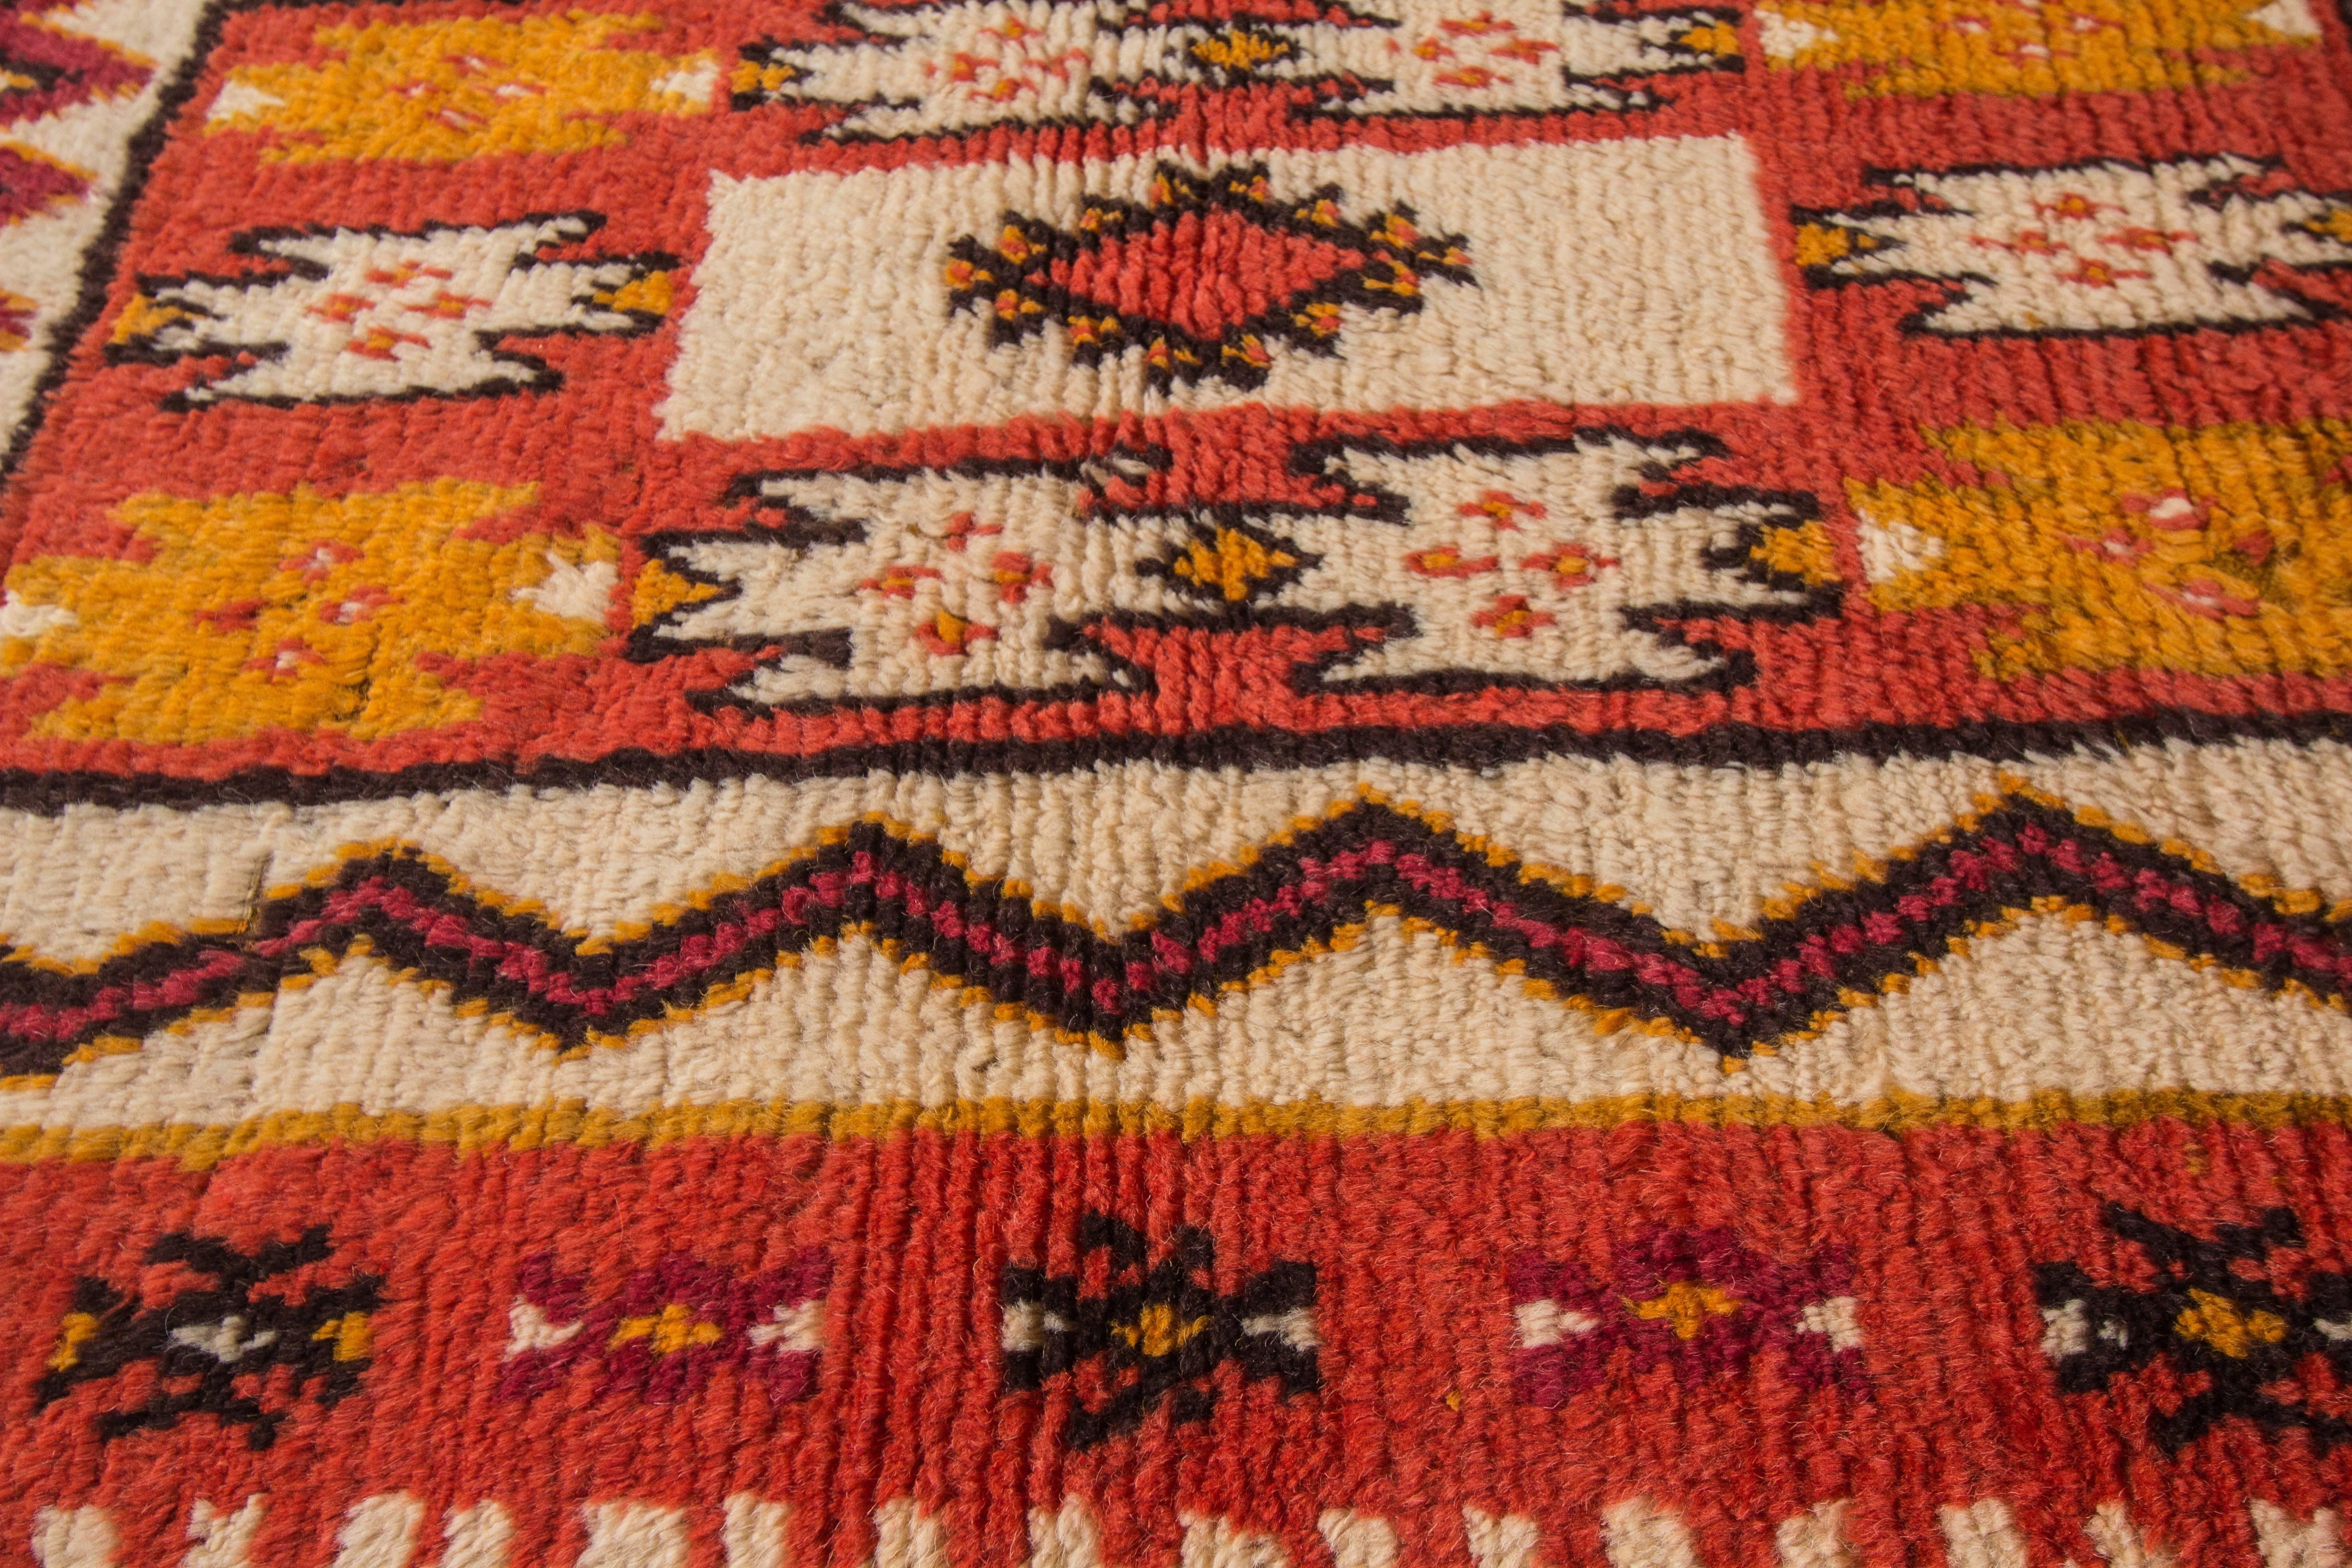 Hand-Knotted Simply Beautiful Vintage Moroccan Rug